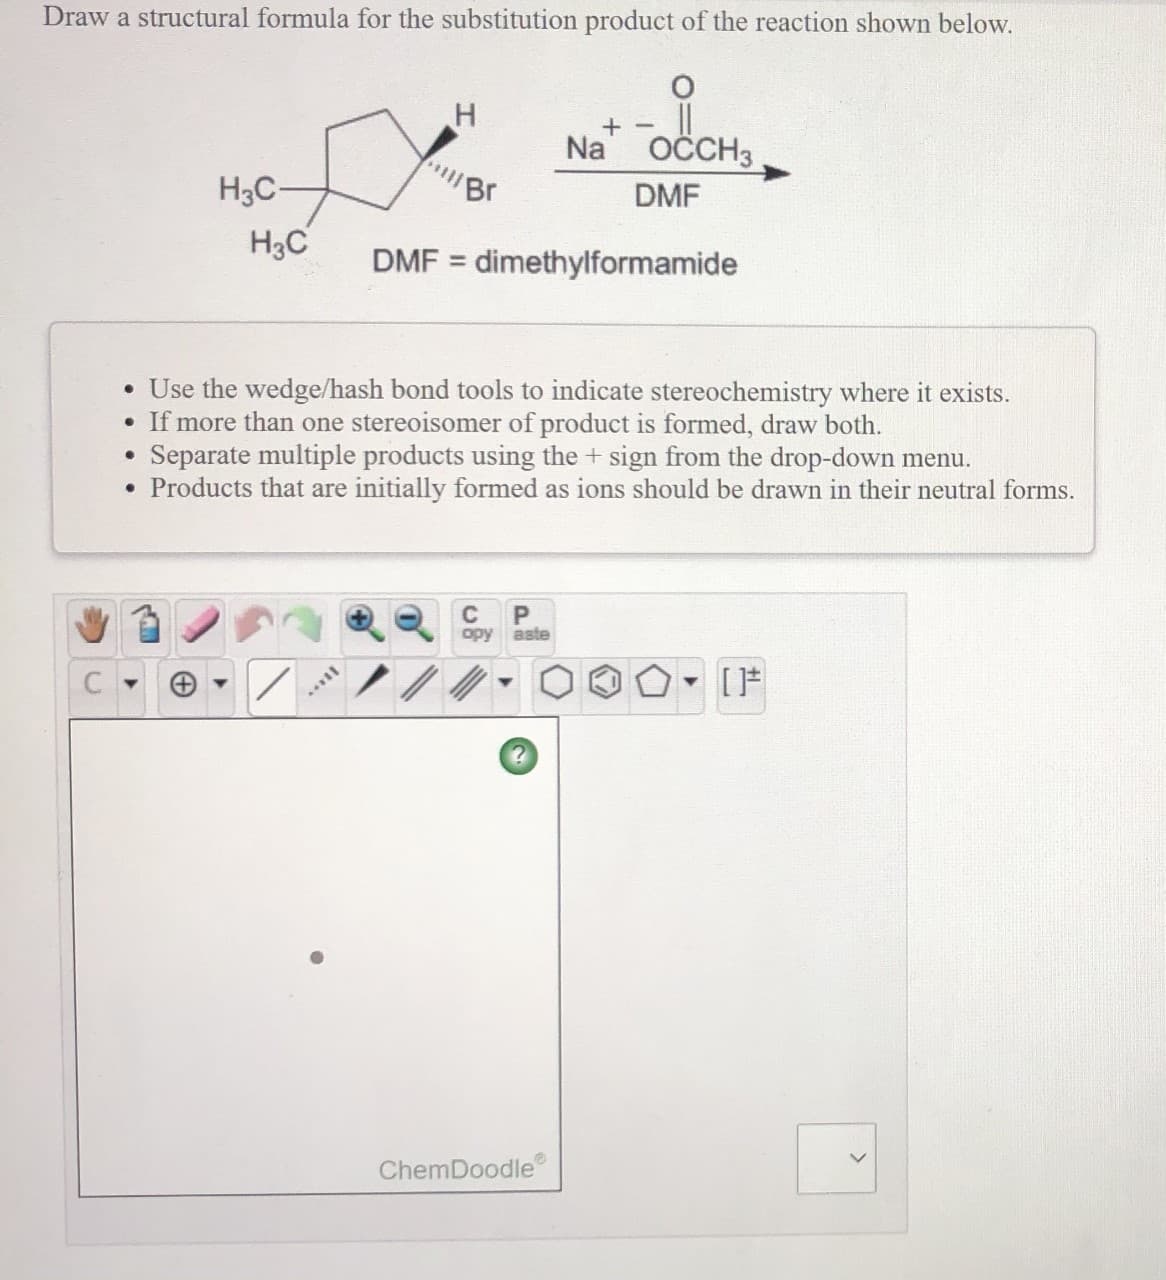 Draw a structural formula for the substitution product of the reaction shown below.
Na
OČCH3
"Br
H3C-
DMF
H3C
DMF = dimethylformamide
%3D
• Use the wedge/hash bond tools to indicate stereochemistry where it exists.
• If more than one stereoisomer of product is formed, draw both.
Separate multiple products using the + sign from the drop-down menu.
• Products that are initially formed as ions should be drawn in their neutral forms.
C
орy aste
ChemDoodle
